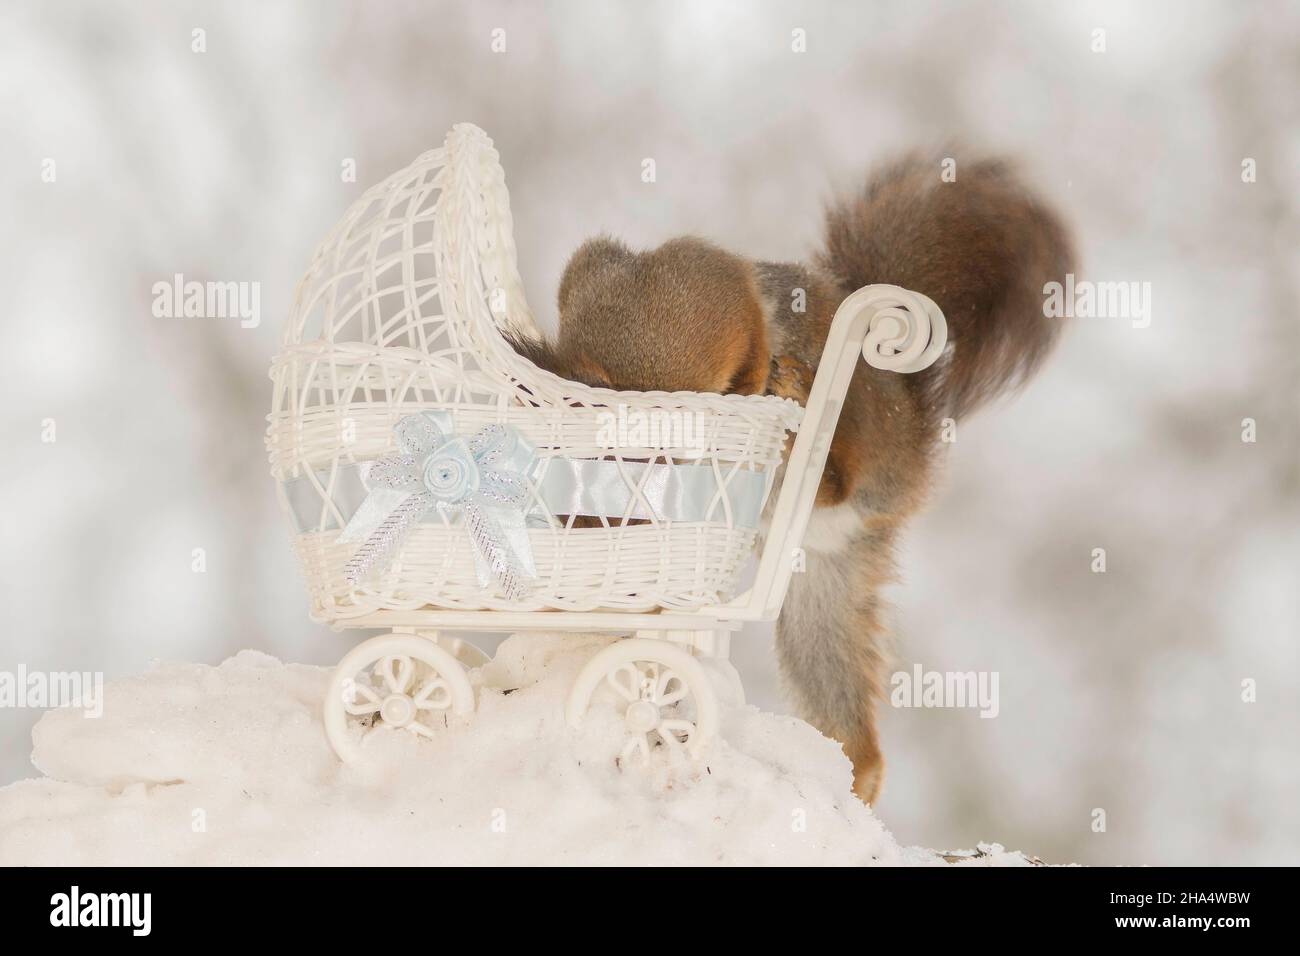 close up of red squirrel on snow with a stroller Stock Photo